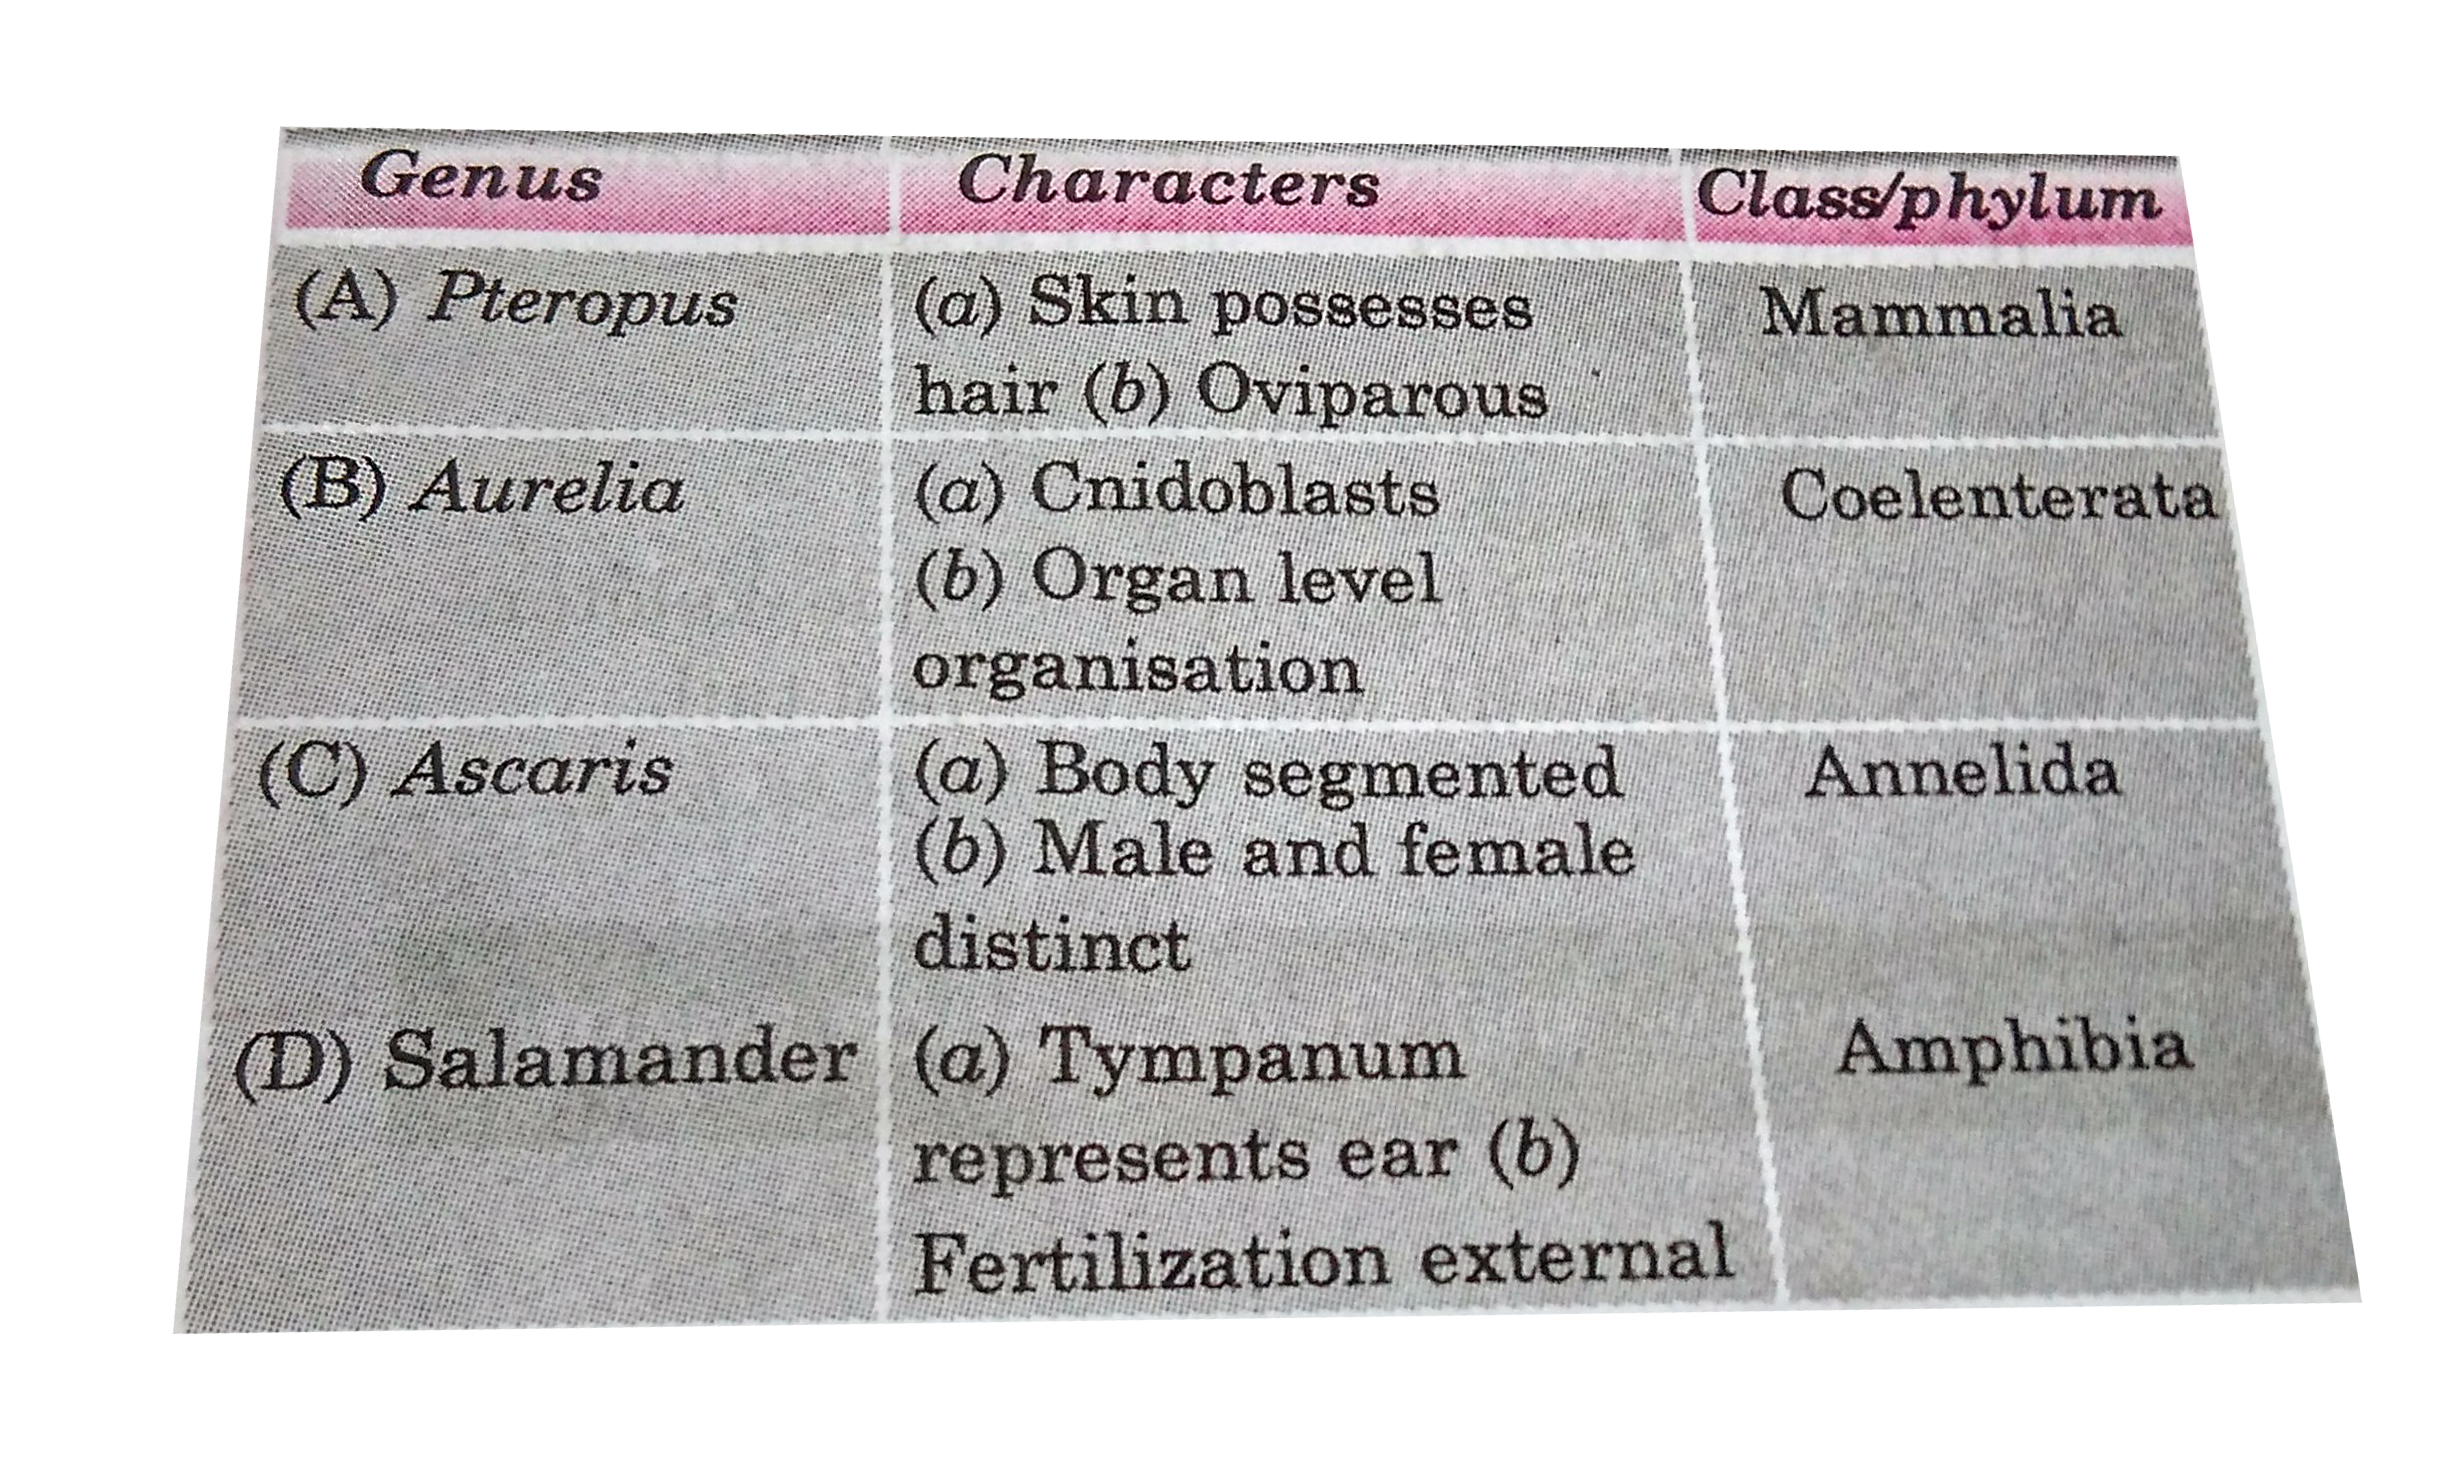 Pick up the one where genus name , its two charcters and class/phylum are correctly matched.